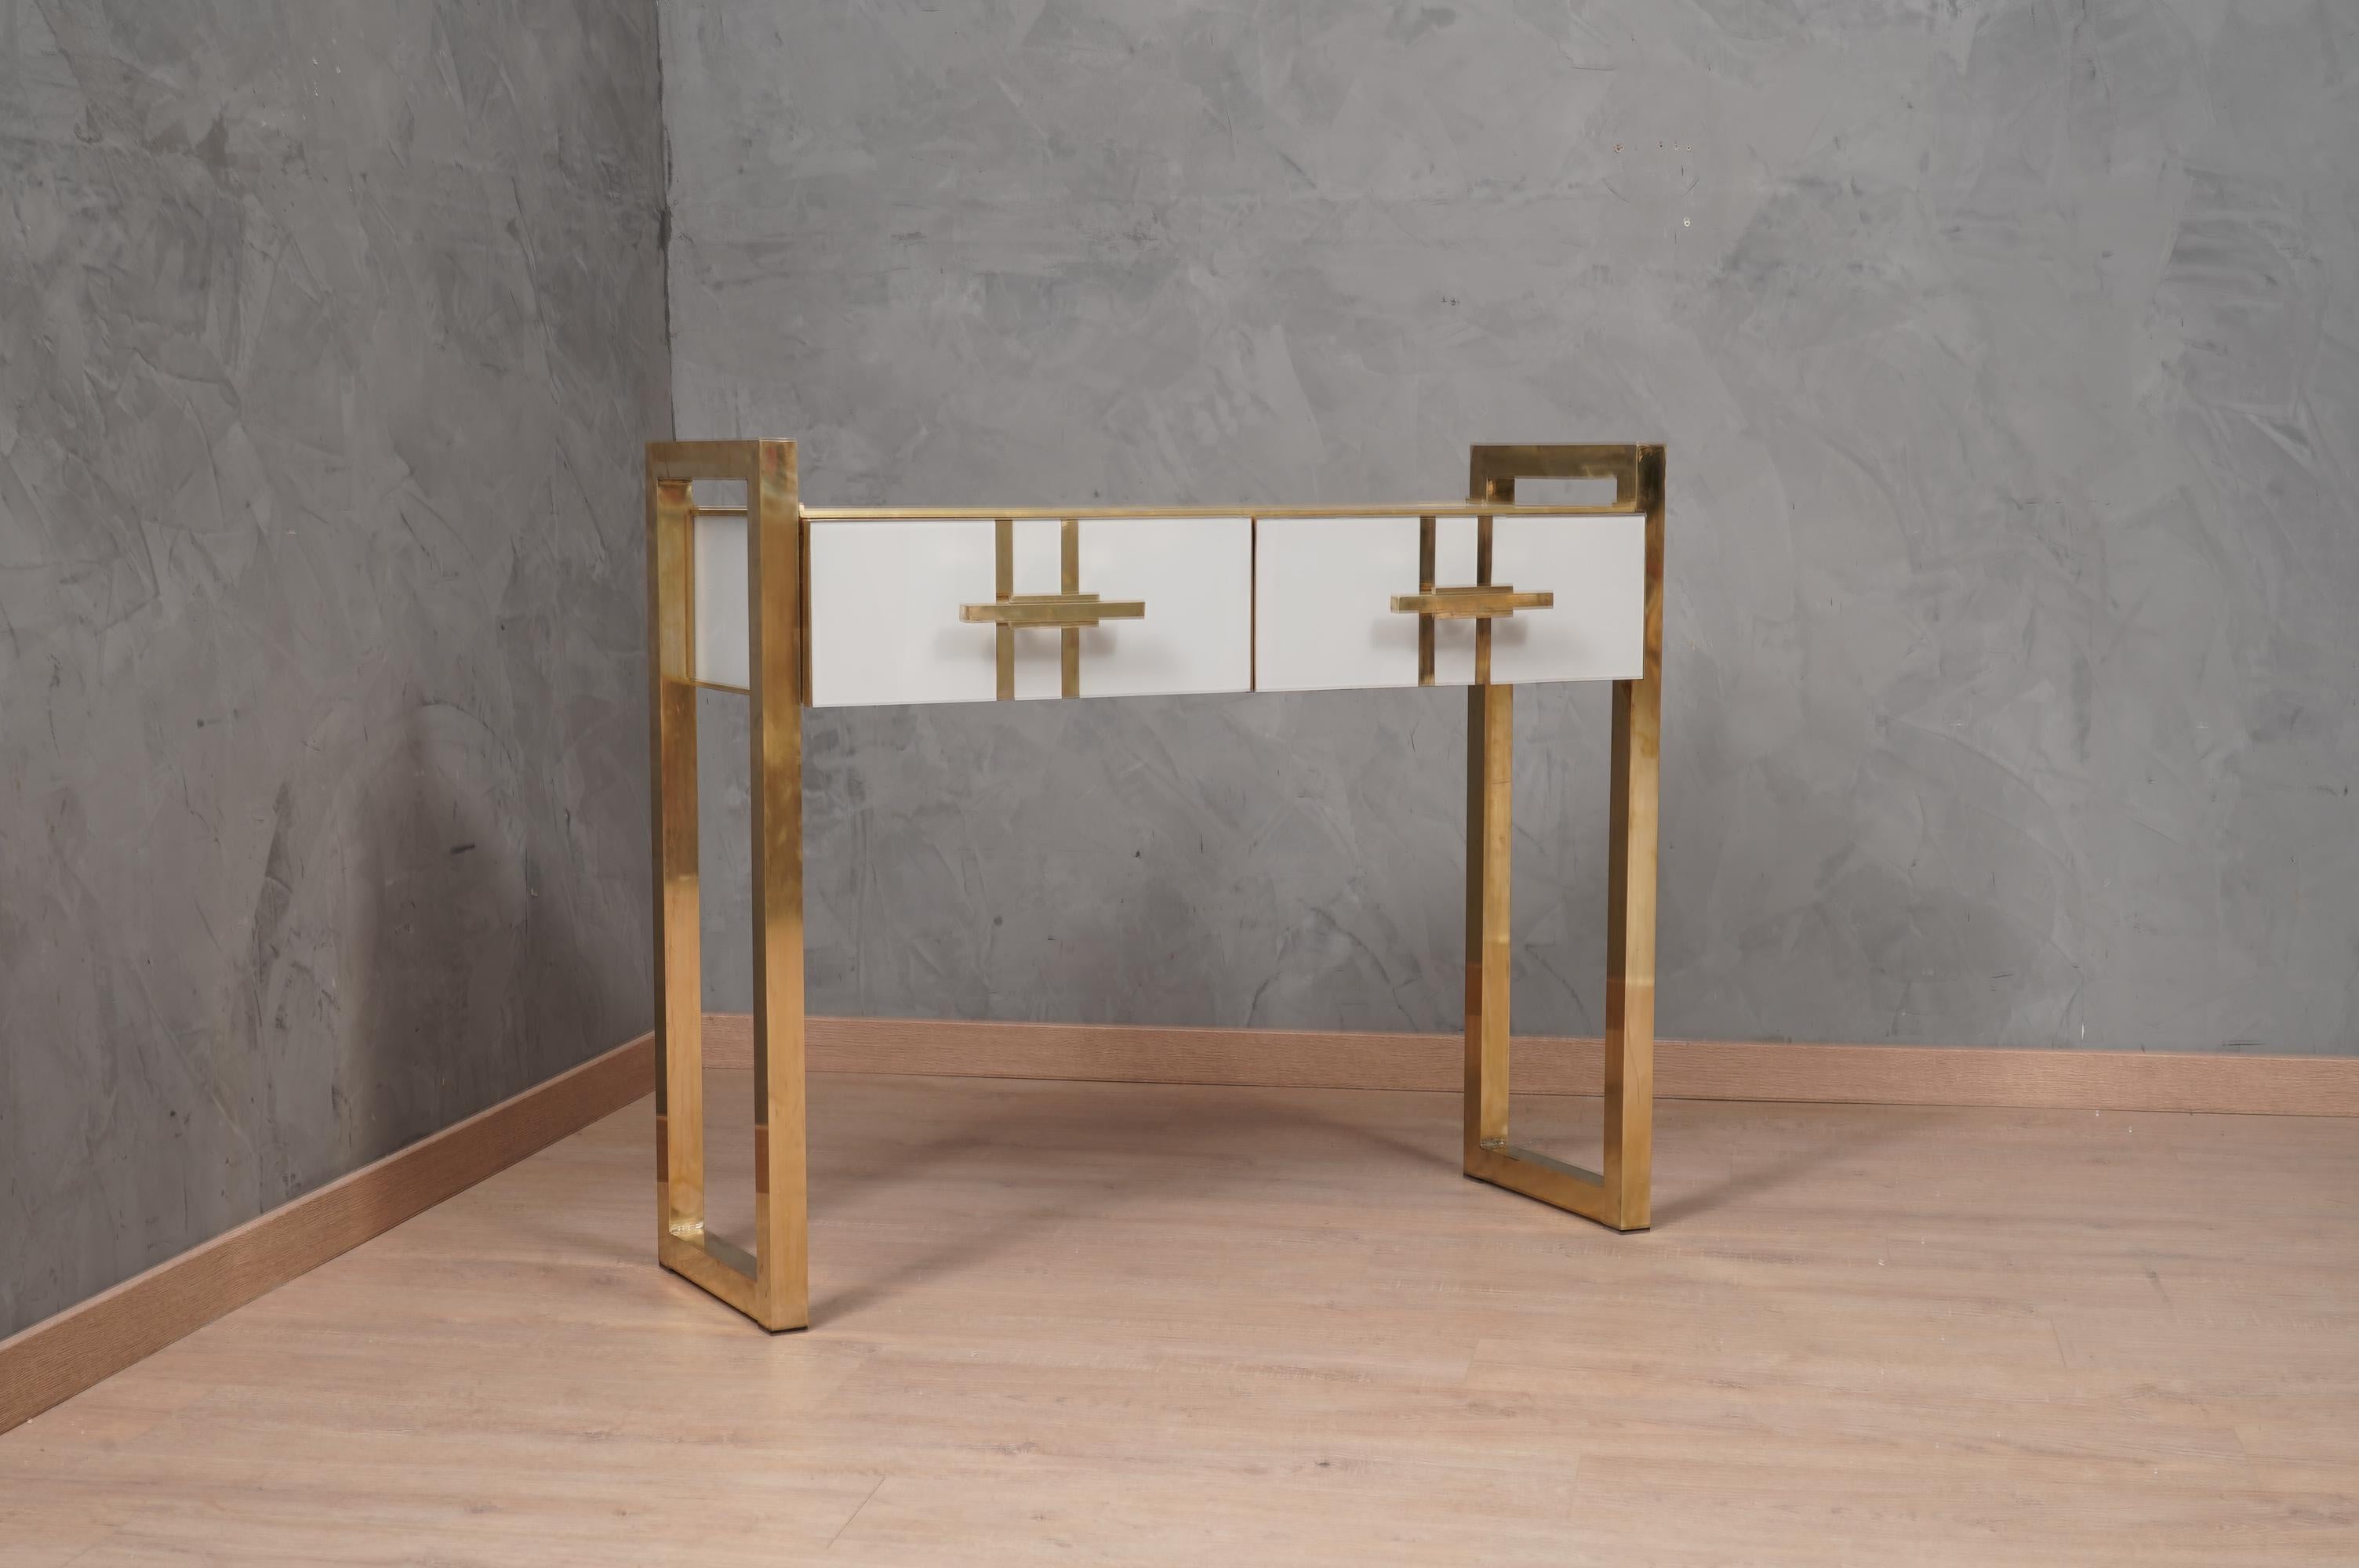 A unique console table of its kind for its originality and for the choice of materials. Simple but refined design. Note the rich workmanship of sides and drawers, with ground white glass squares interspaced with brass rods.

The console is composed